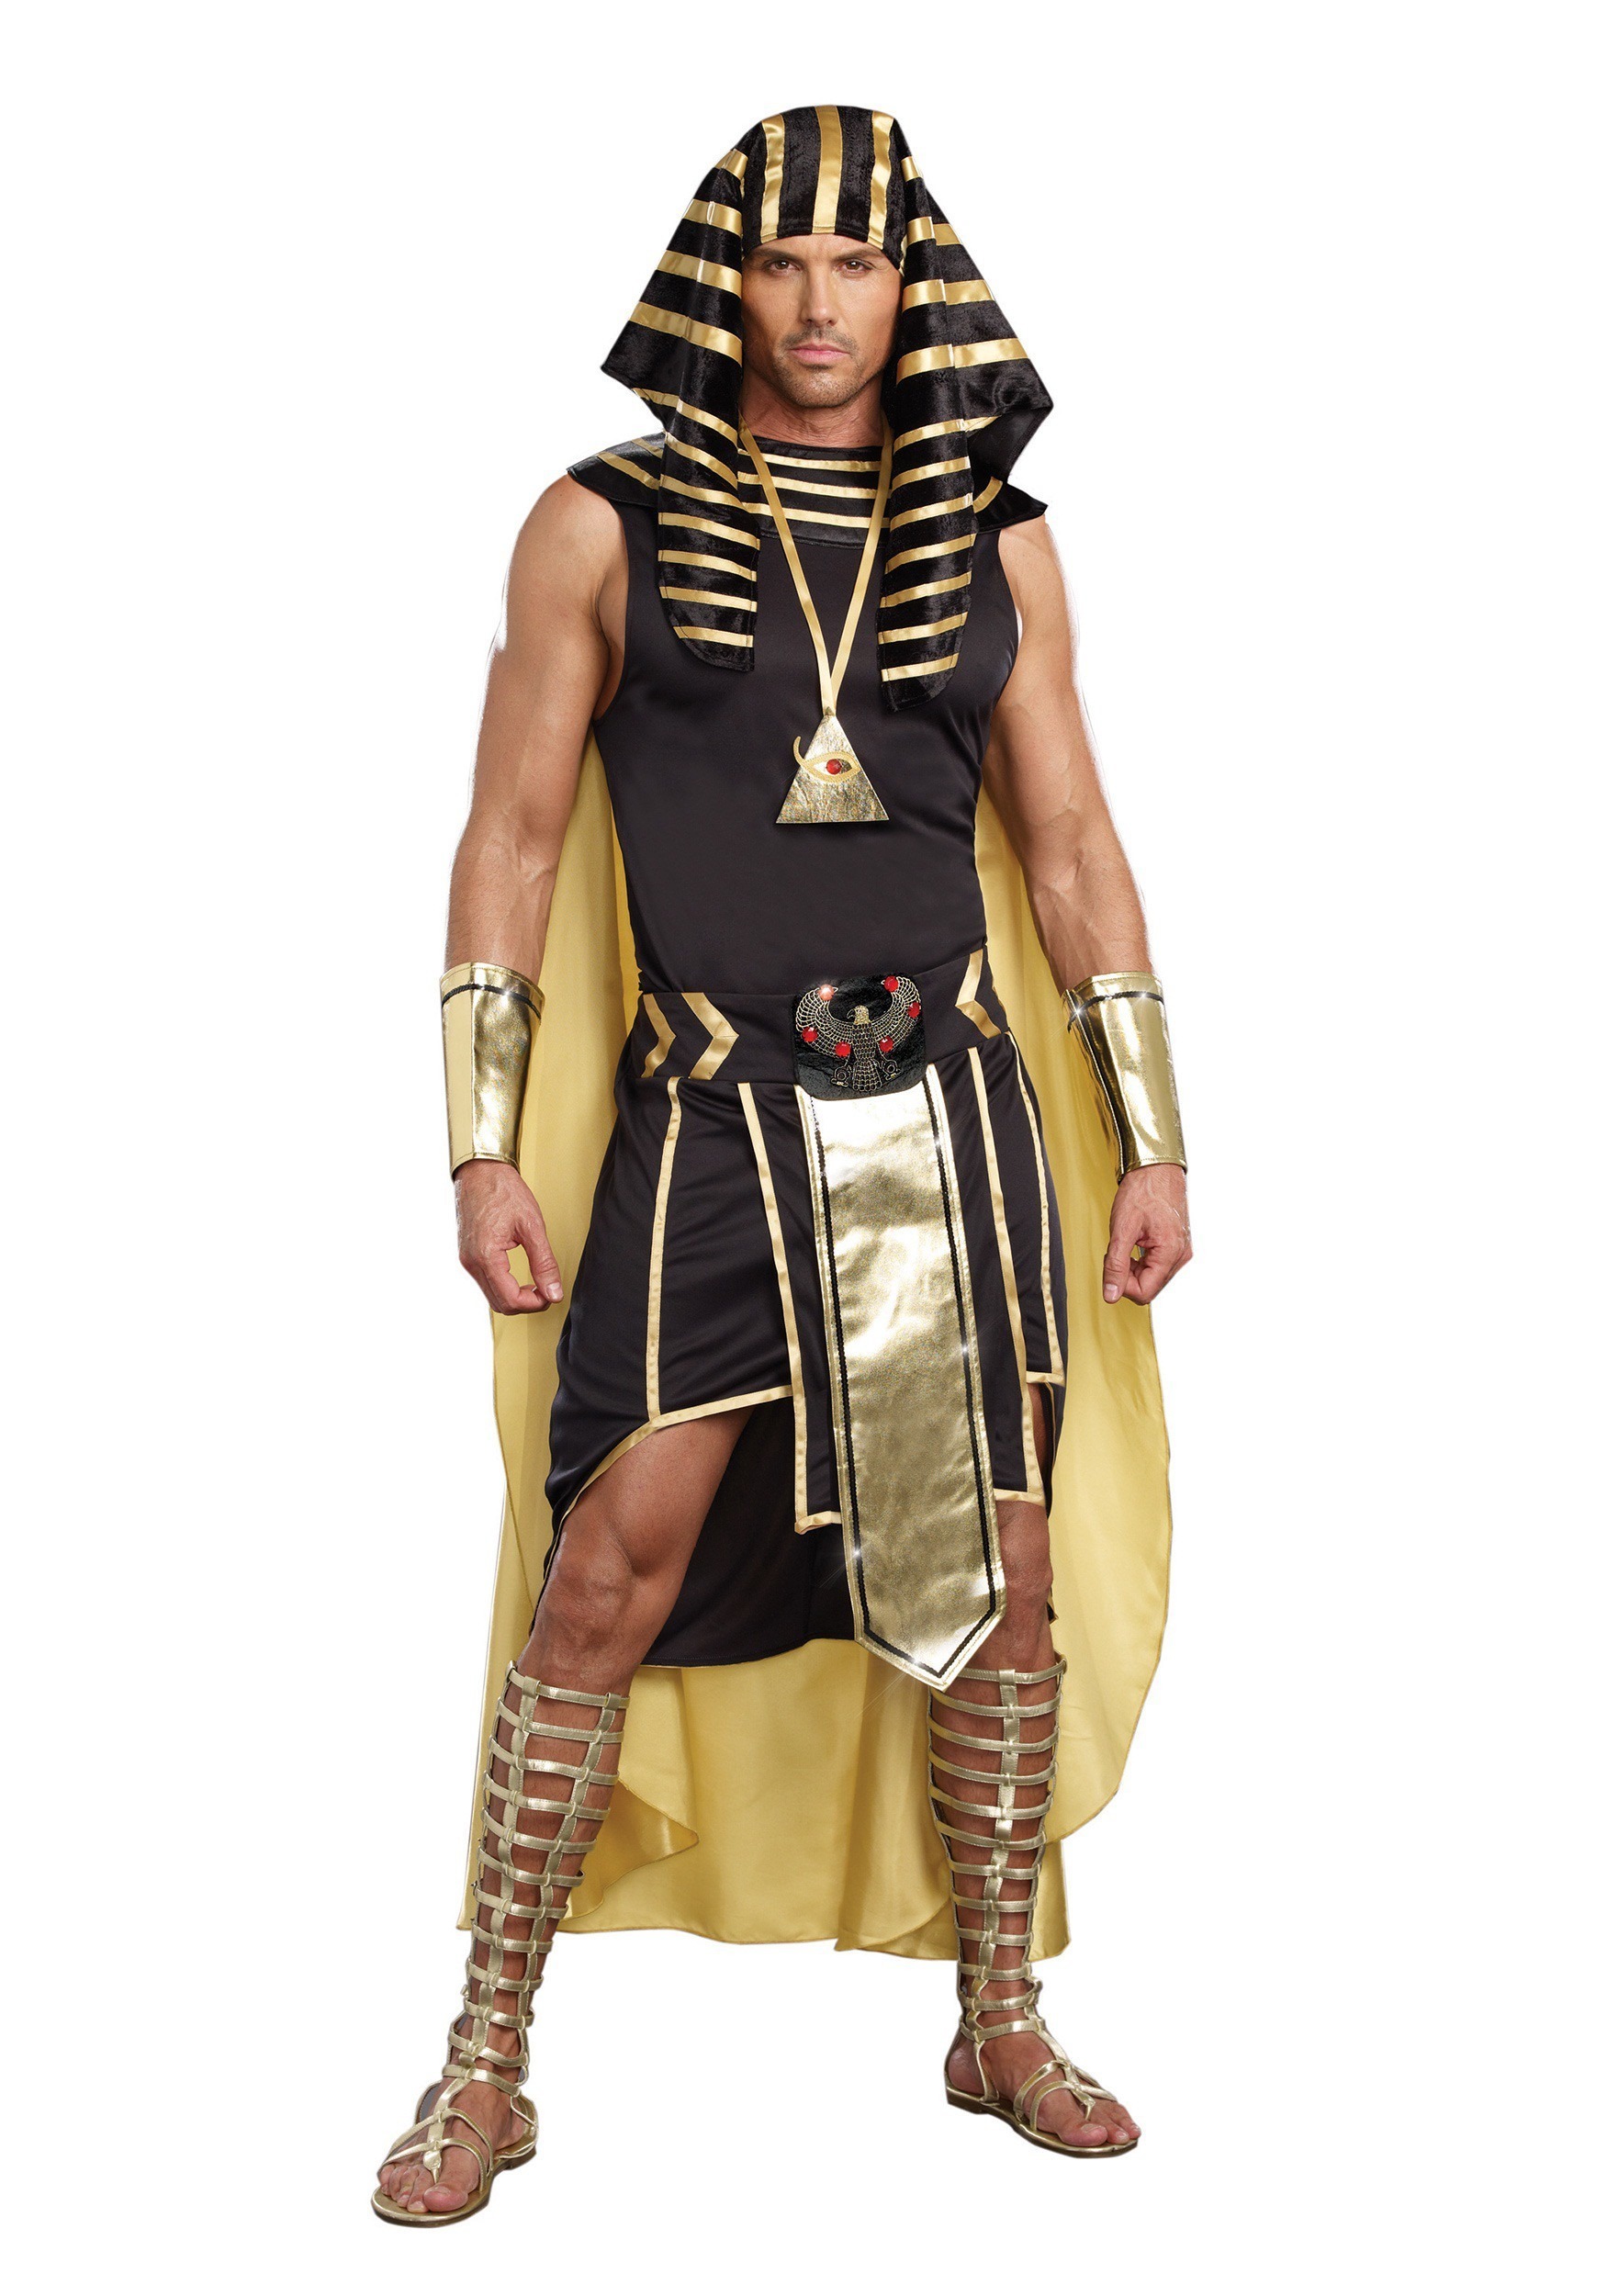 Photos - Fancy Dress Flama Dreamgirl Plus Size King of Egypt Costume For An Adult | Egyptian Costume 